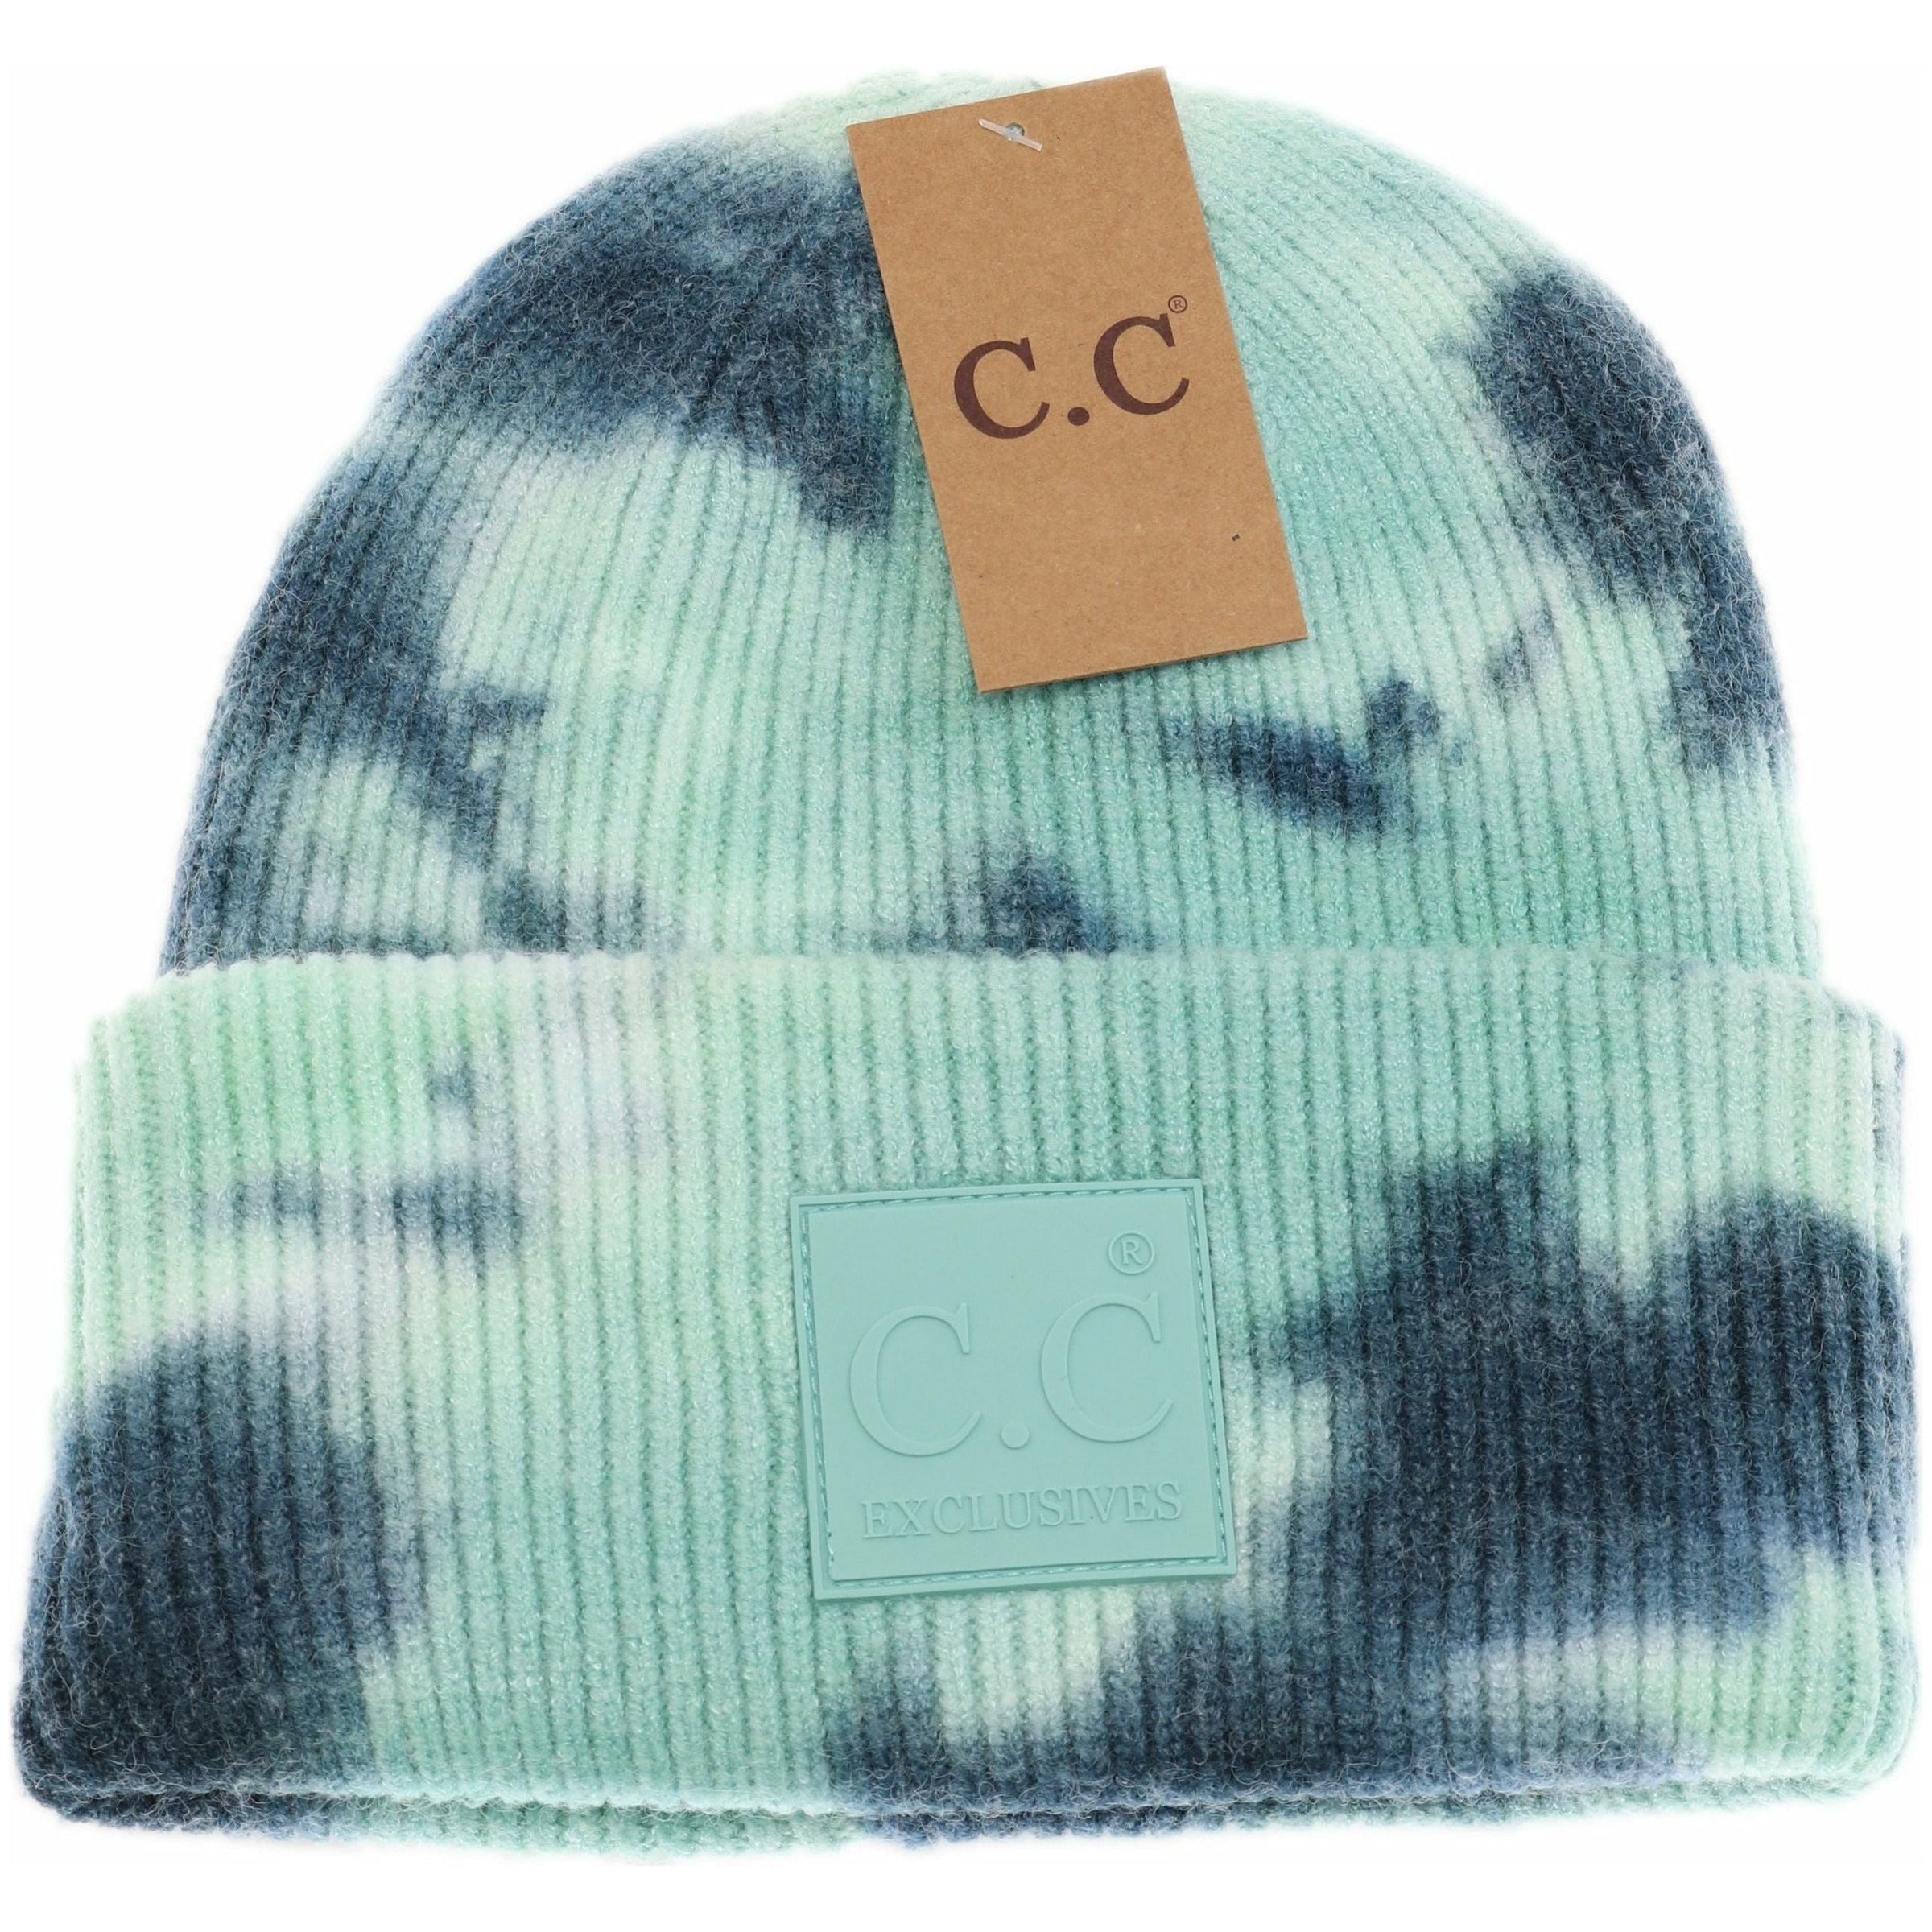 Ribbed CC Beanie - The Trendy Trunk